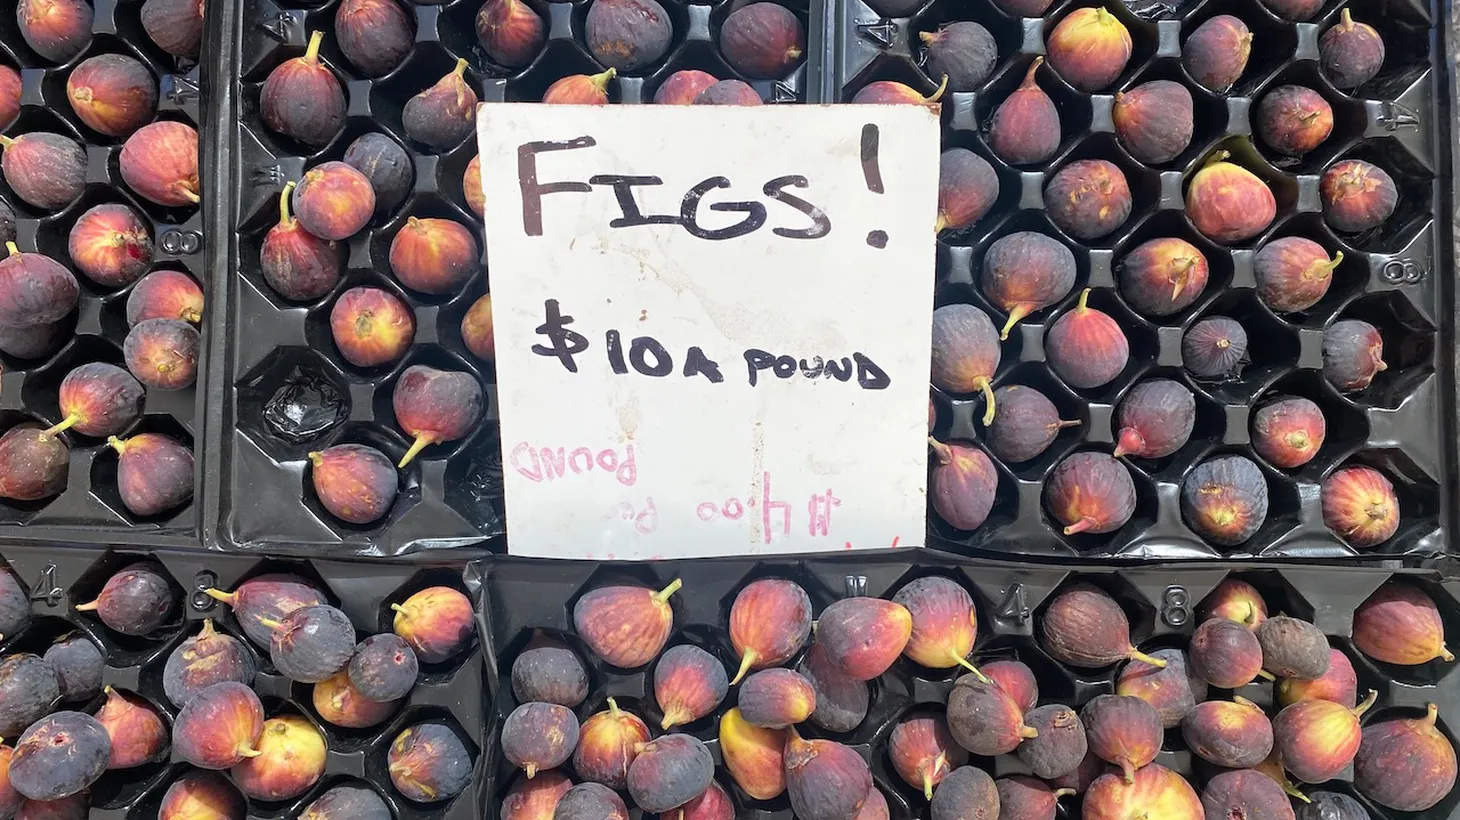 Figs are a late summer treat at the Santa Monica farmers market.